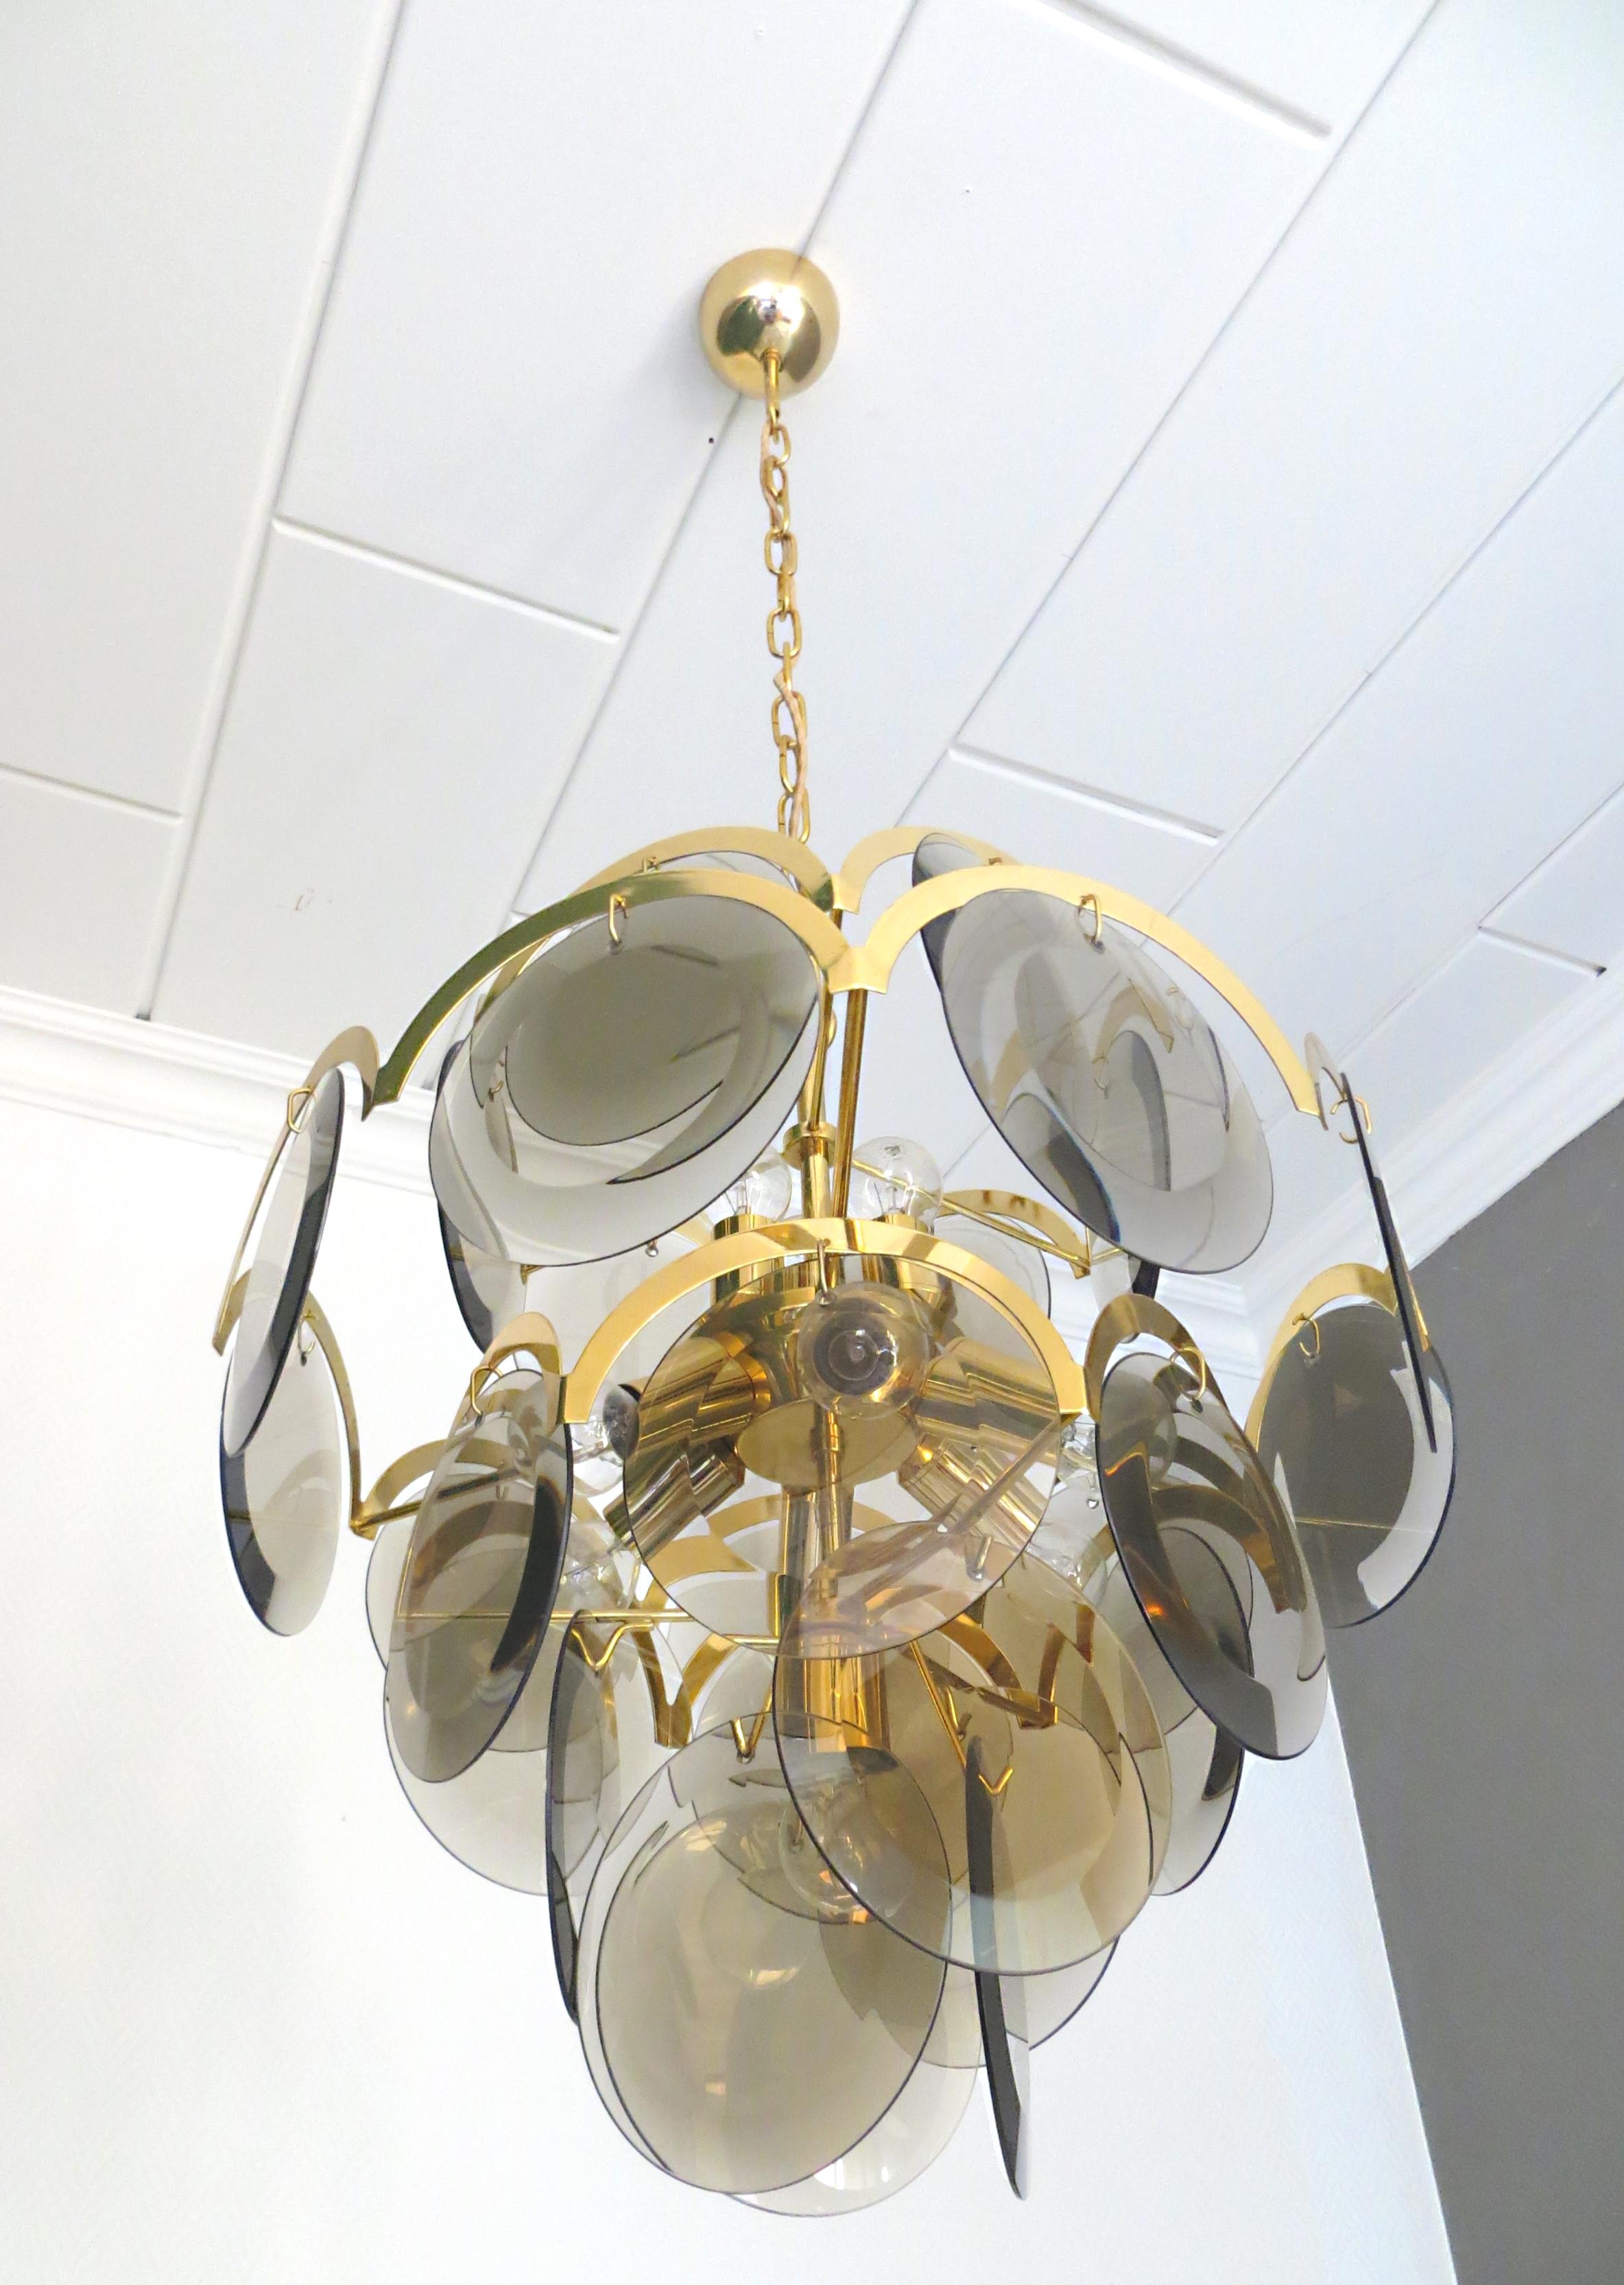 We are offer you an vintage chandelier by Gino Vistosi from Italy, 1970s - 1980s . These hanging lamp have four tiers, with round smoke
disc glass, framed by half moon gilded or gilt shaped brass.
It has 27 glass discs and 10 light bulbs, for an